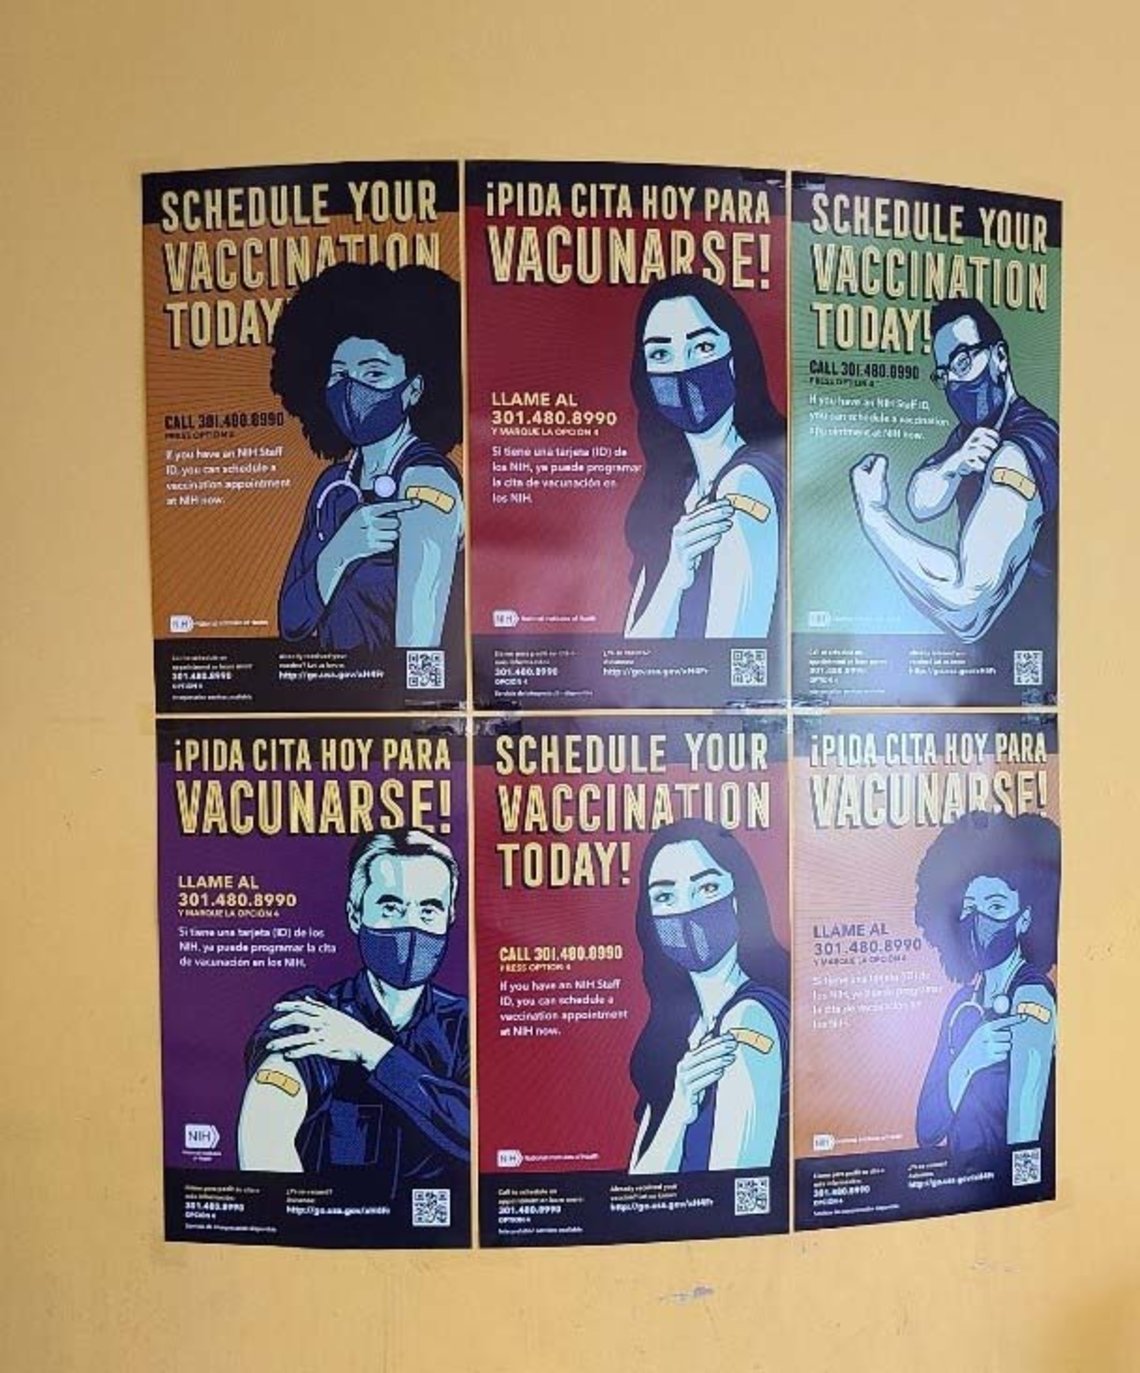 The image shows six different posters, all encouraging NIHer's to schedule COVID-19 vaccinations